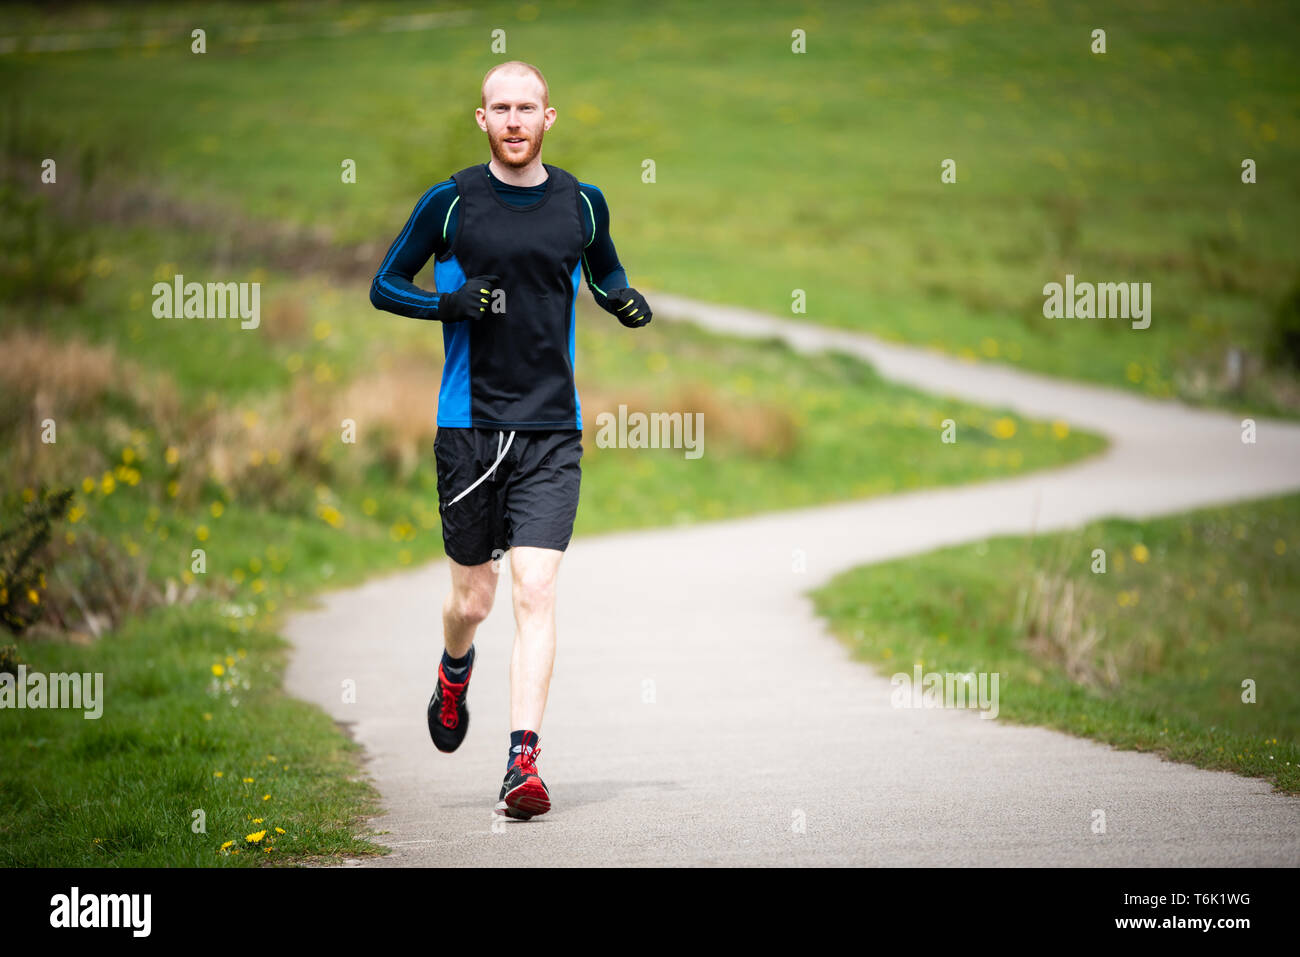 Young man in mid 20s exercising and keeping fit by running in a park Stock Photo